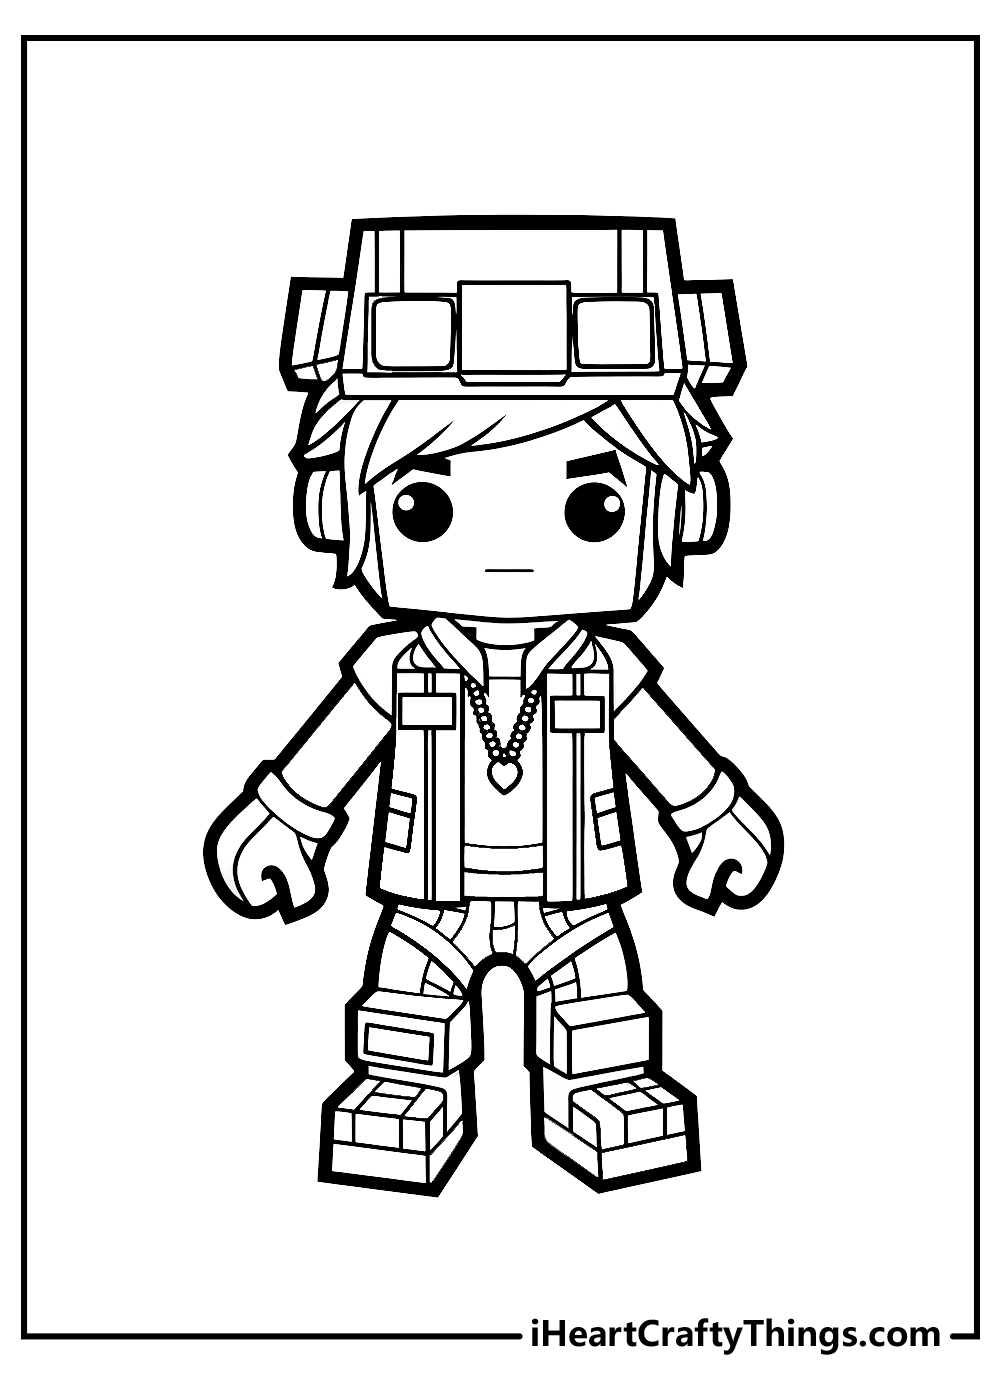 Free Roblox Doors Coloring Pages: Printable and Easy to Print